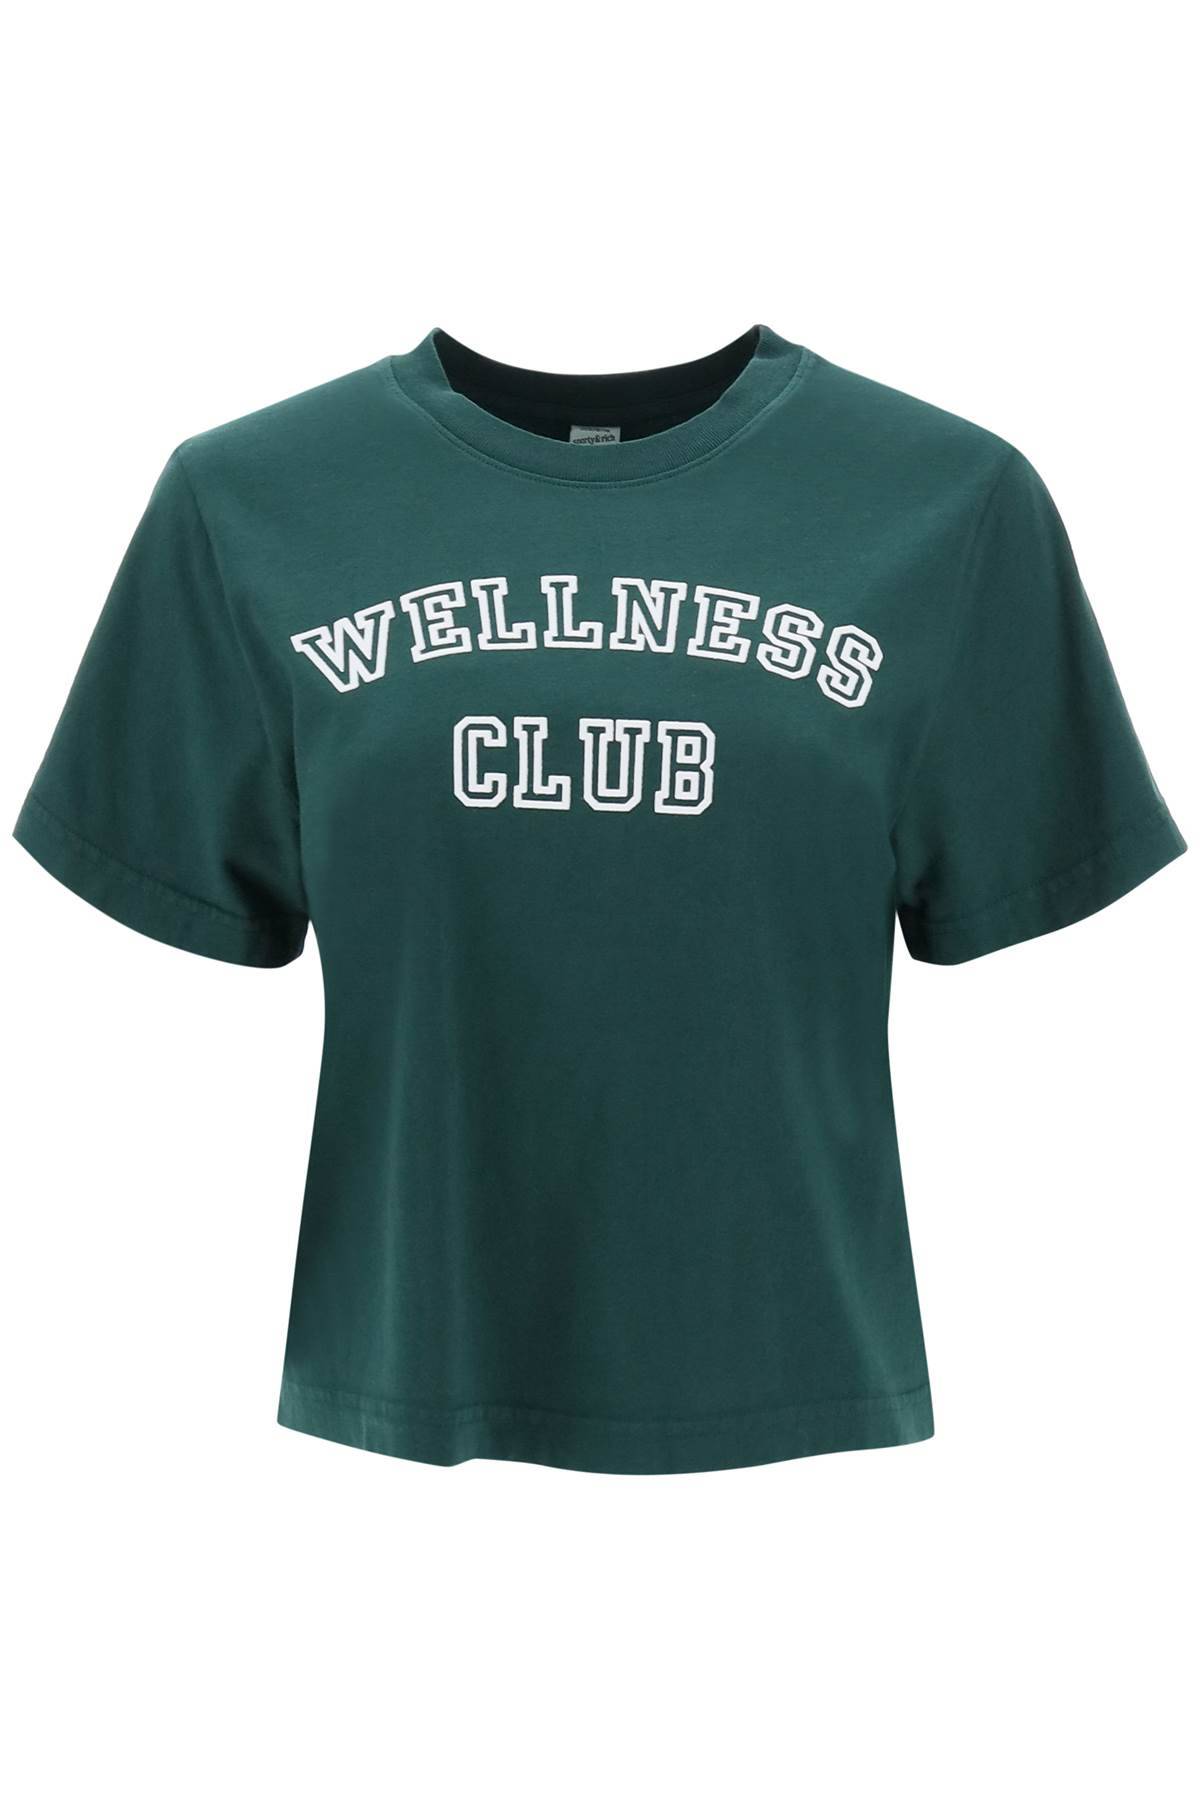 SPORTY AND RICH WELLNESS CLUB CROPPED T-SHIRT